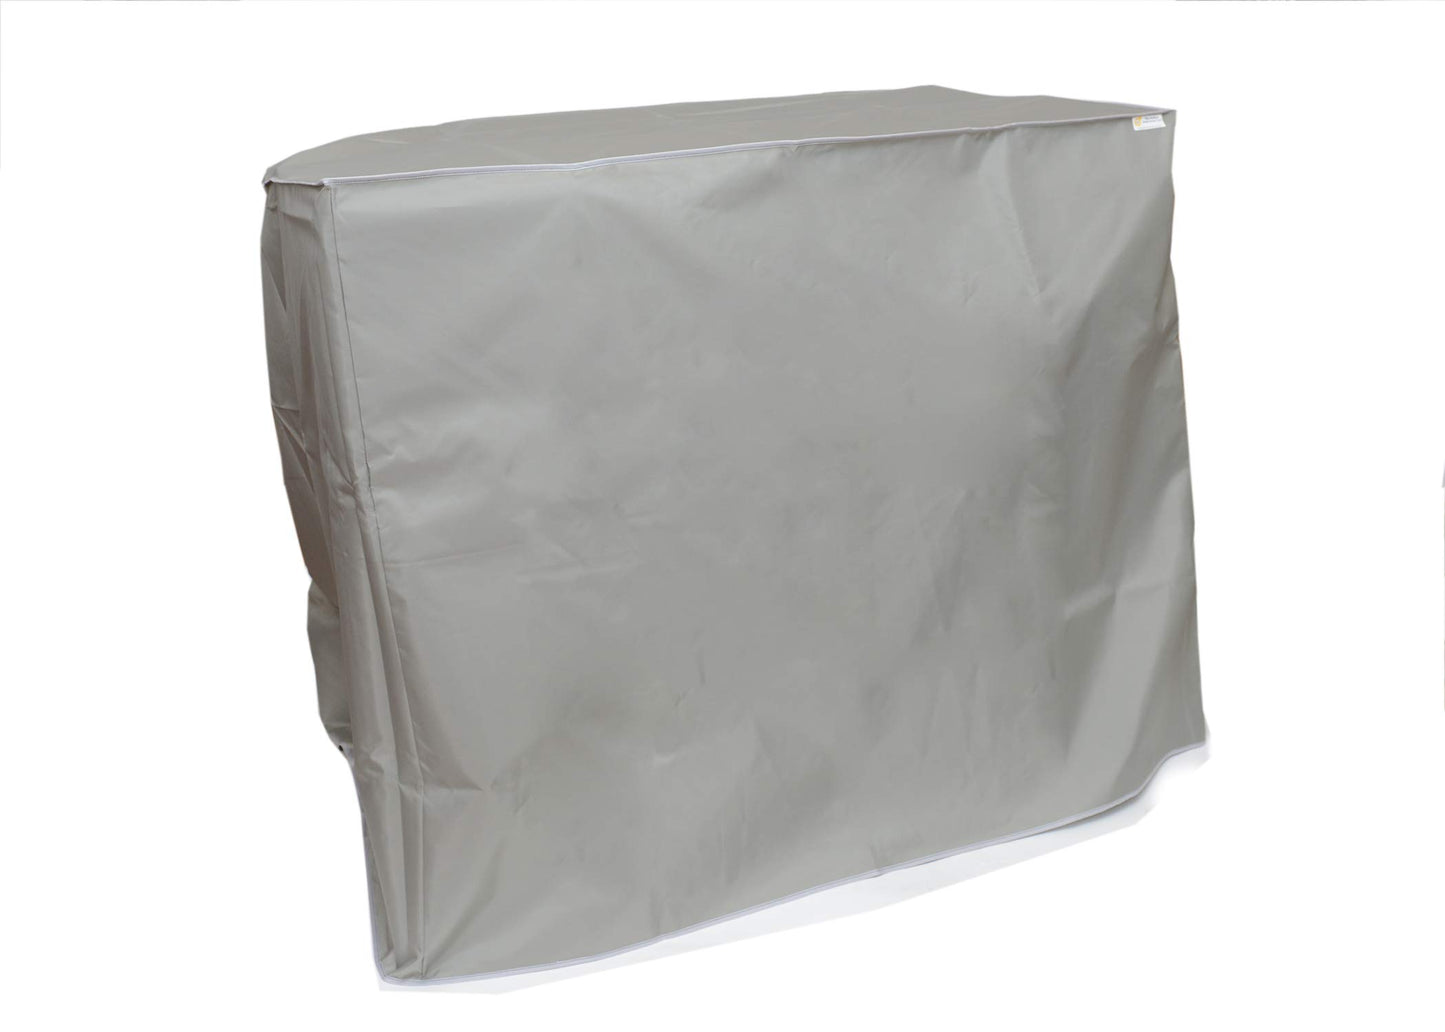 The Perfect Dust Cover, Silver Gray Nylon Cover for HP DesignJet T795 44-in Large Format Printer, Anti Static Waterproof, Dimensions 69.7''W x 27.6''D x 41.3''H by The Perfect Dust Cover LLC